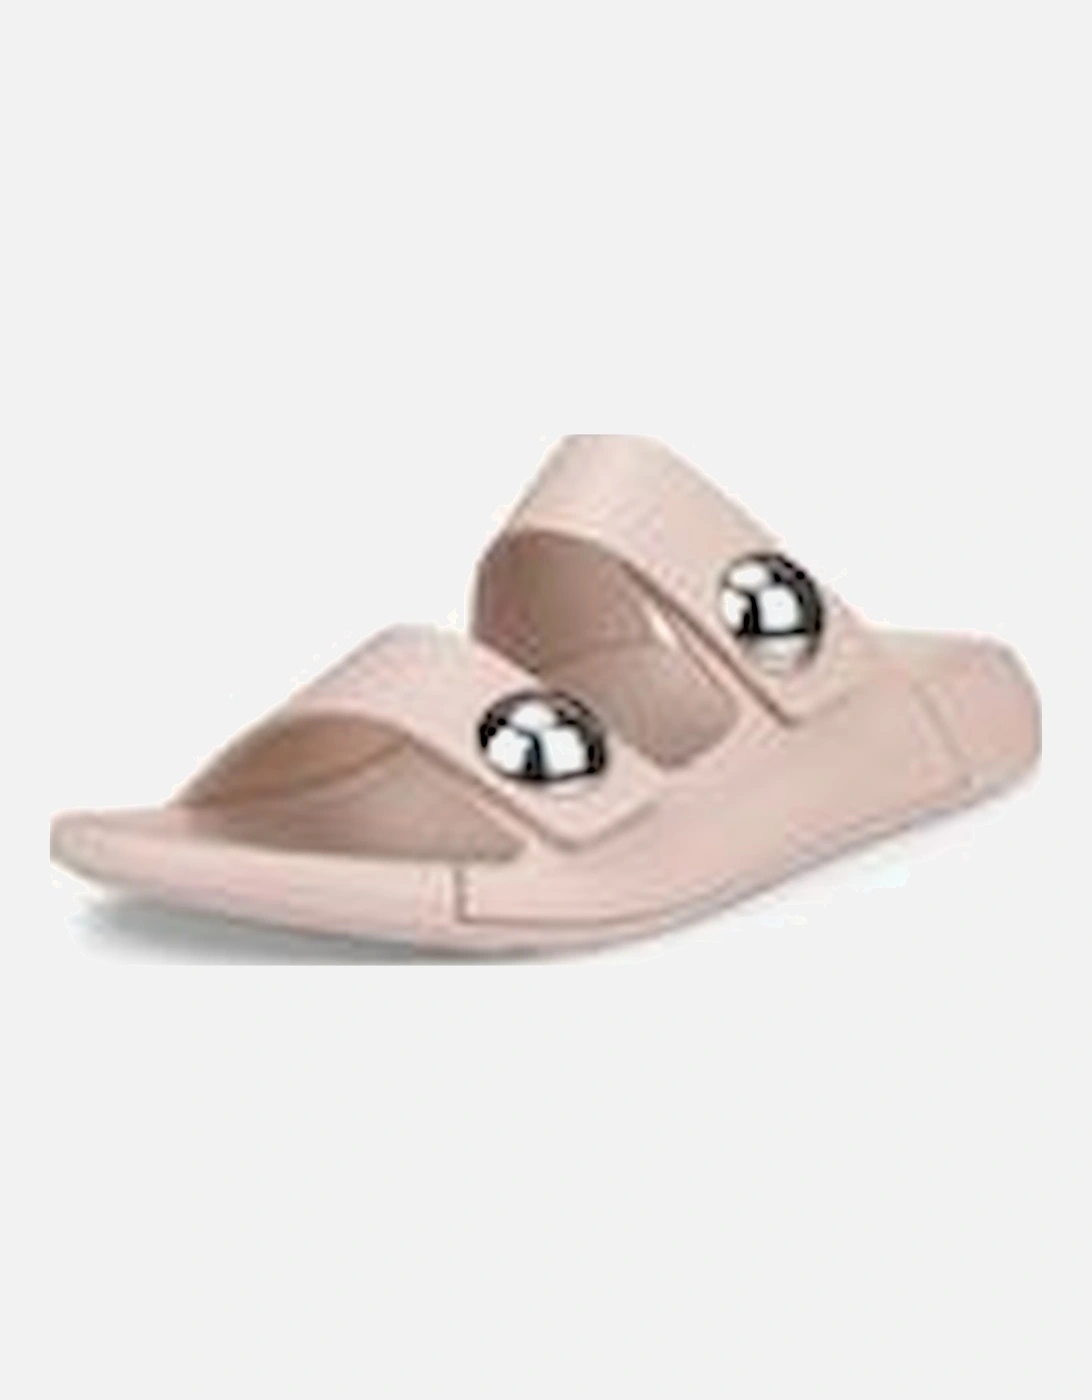 Cozmo Sandal 206883-01118 in Rose Dust Leather, 4 of 3